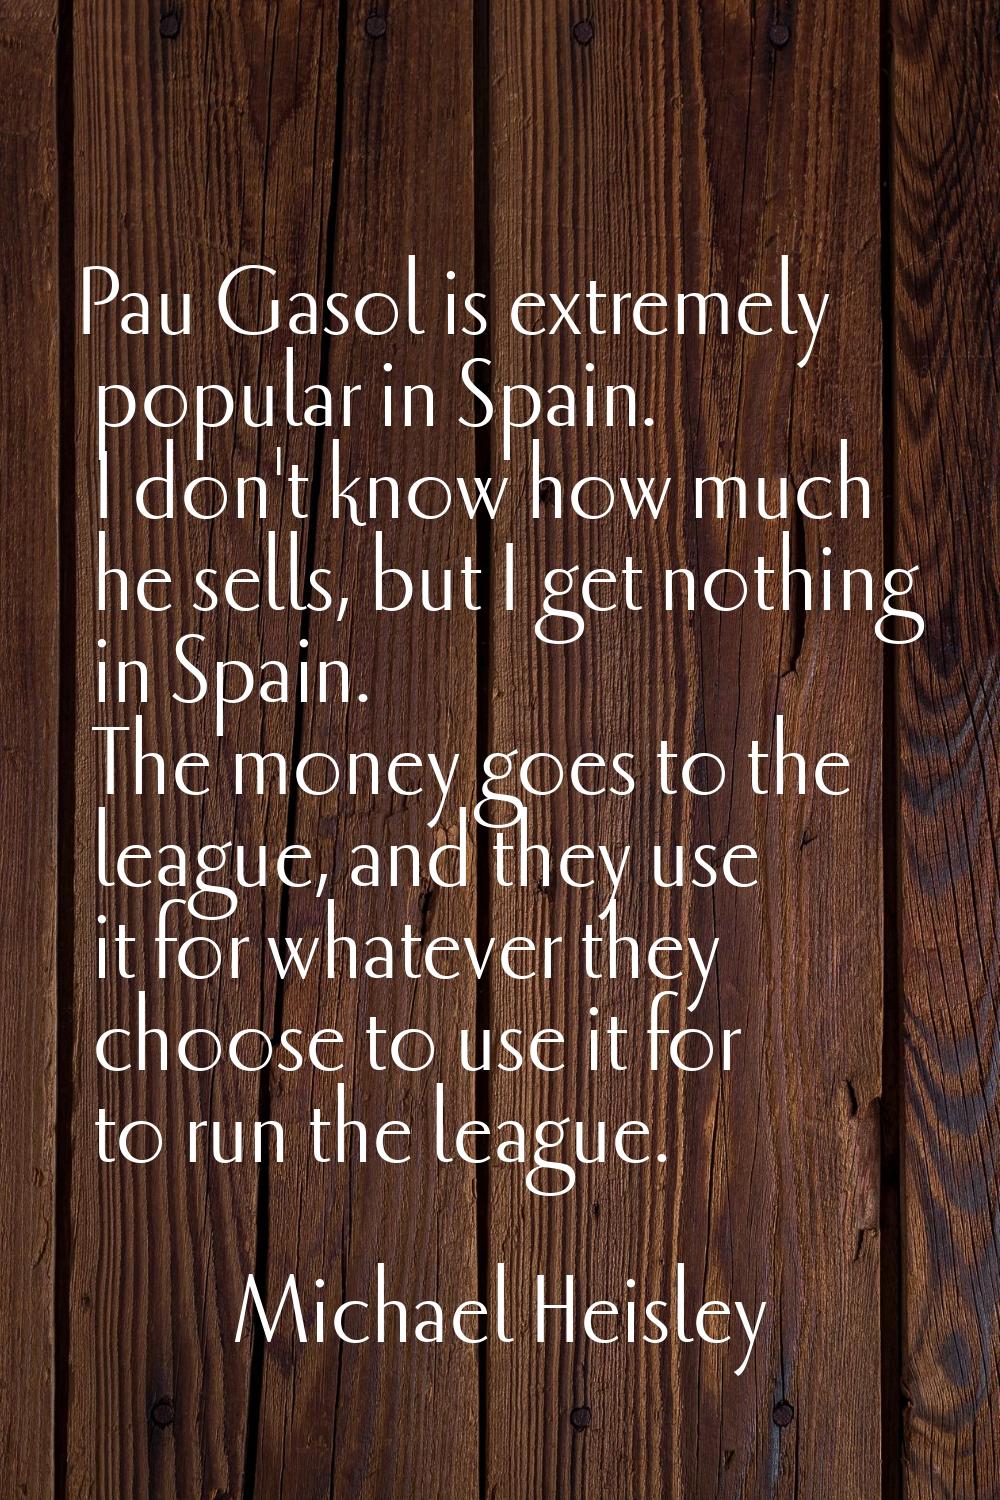 Pau Gasol is extremely popular in Spain. I don't know how much he sells, but I get nothing in Spain